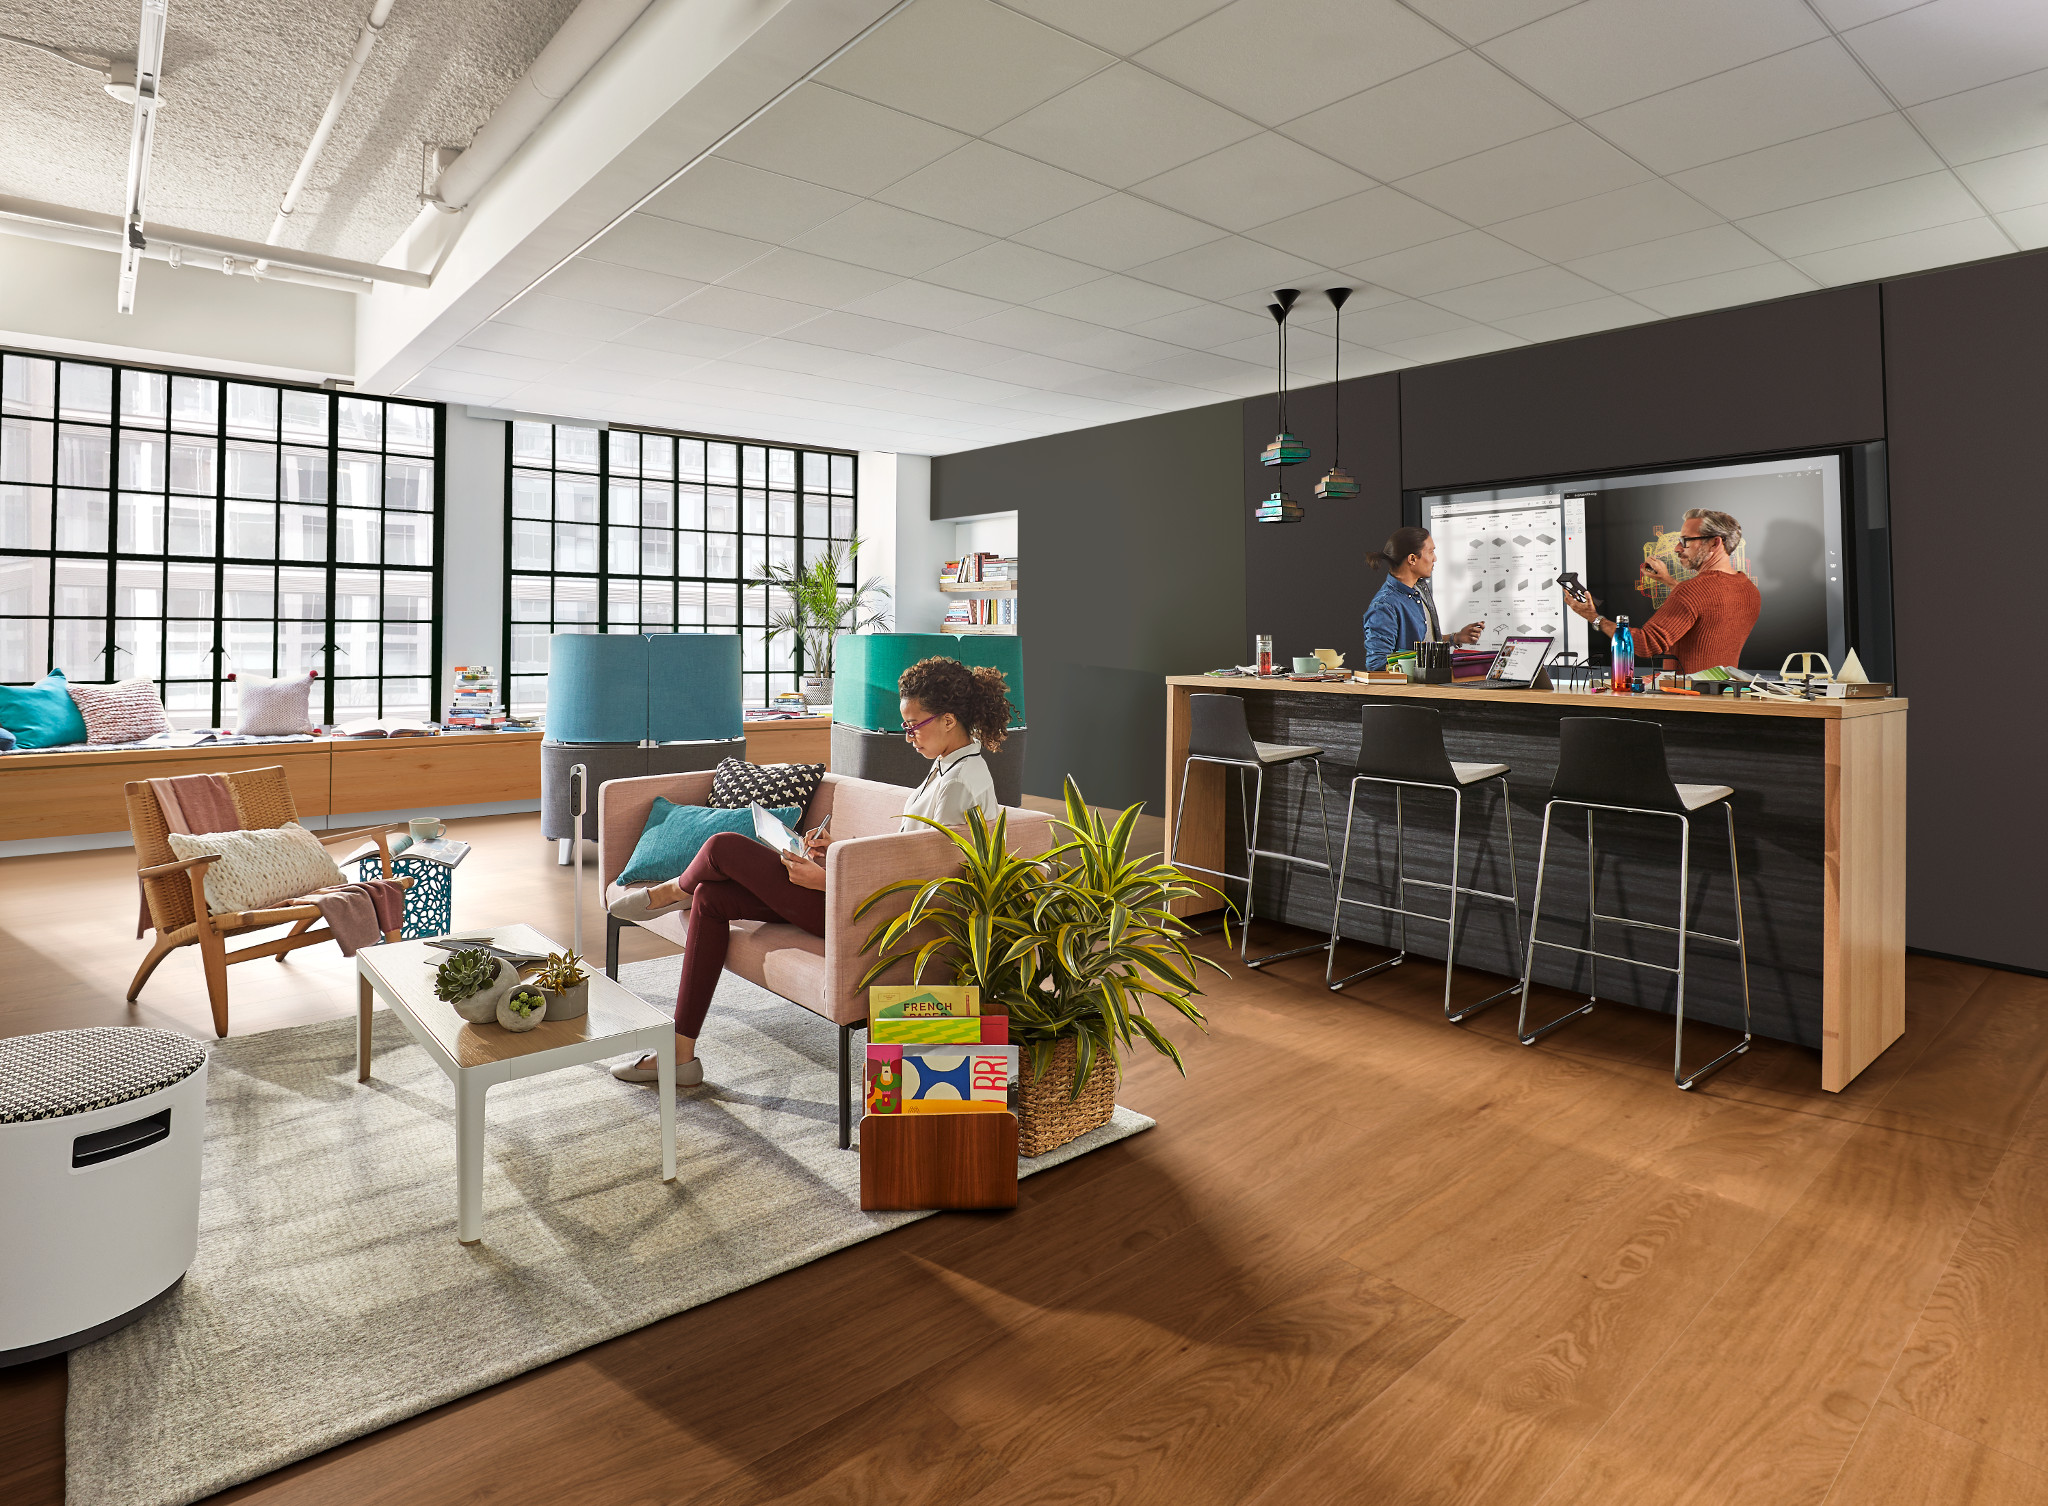 Maker Commons: Socializing ideas and rapid prototyping are essential parts of creativity. This space is designed to encourage quick switching between conversation, experimentation and concentration, ideal for a mix of Surface devices, such as Surface Hub and Surface Book.